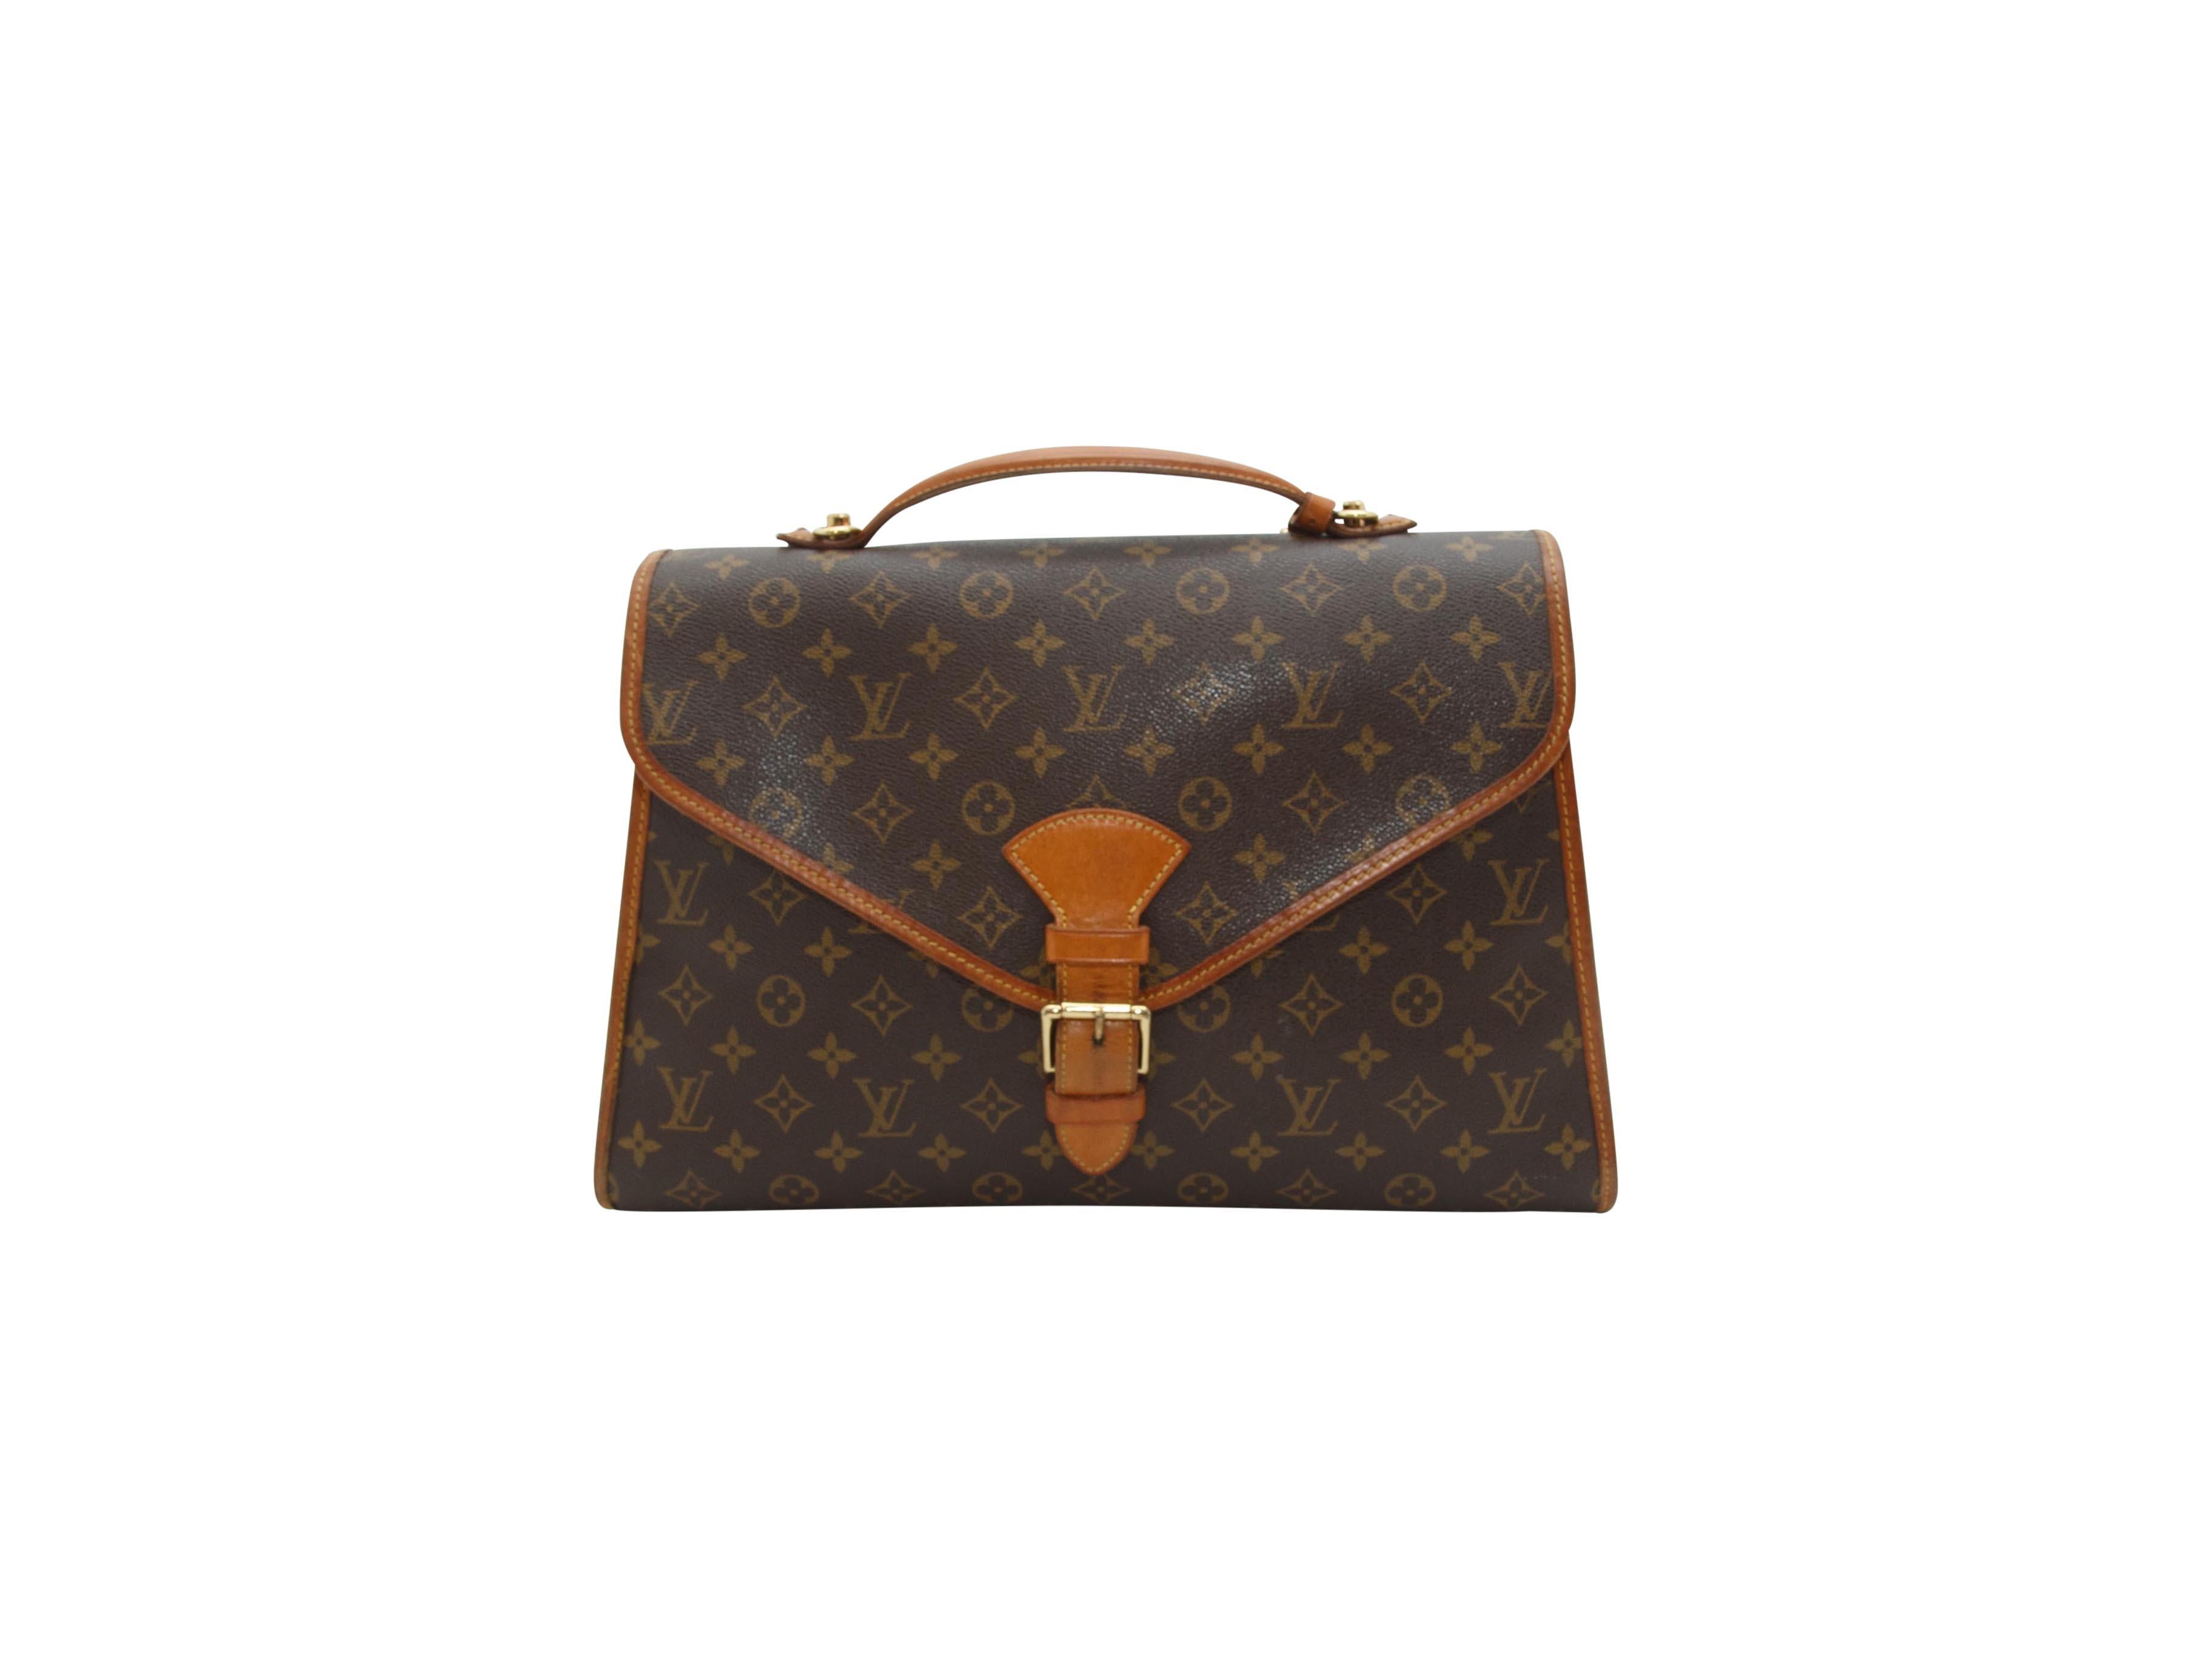 Product details:  Brown monogram coated canvas satchel by Louis Vuitton.  Trimmed with tan leather.  Top carry handle.  Detachable, adjustable shoulder strap.  Front flap with adjustable buckle closure.  Lined interior with inner zip pocket. 